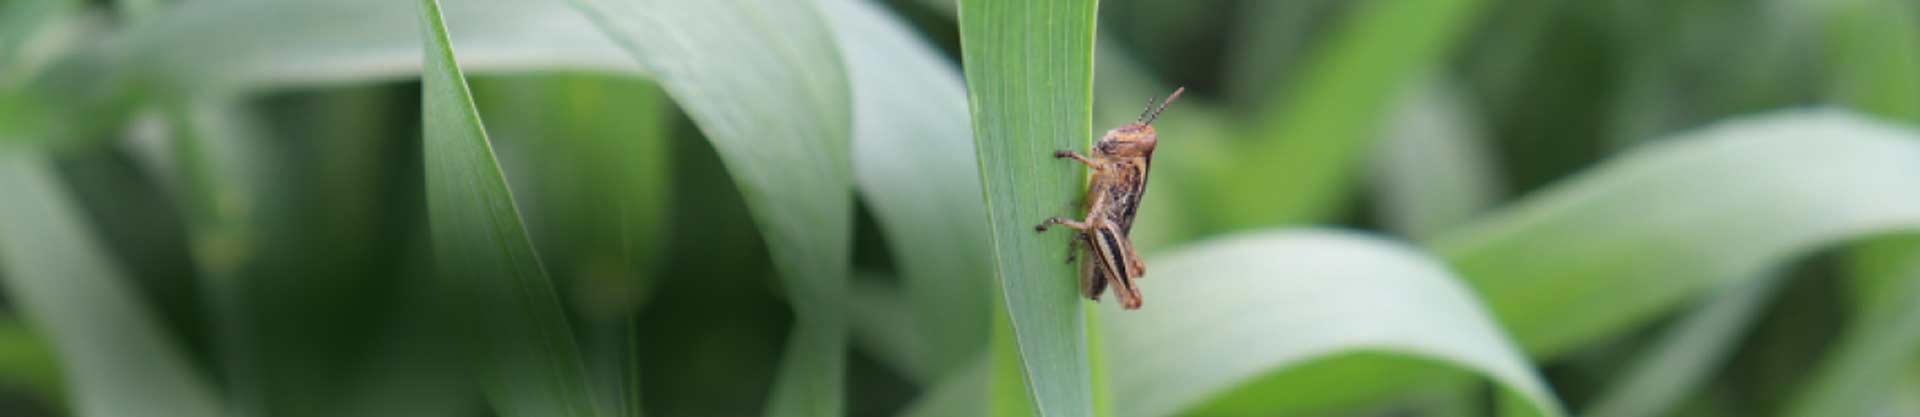 Pest Management in Winter Wheat – Diseases and Insects